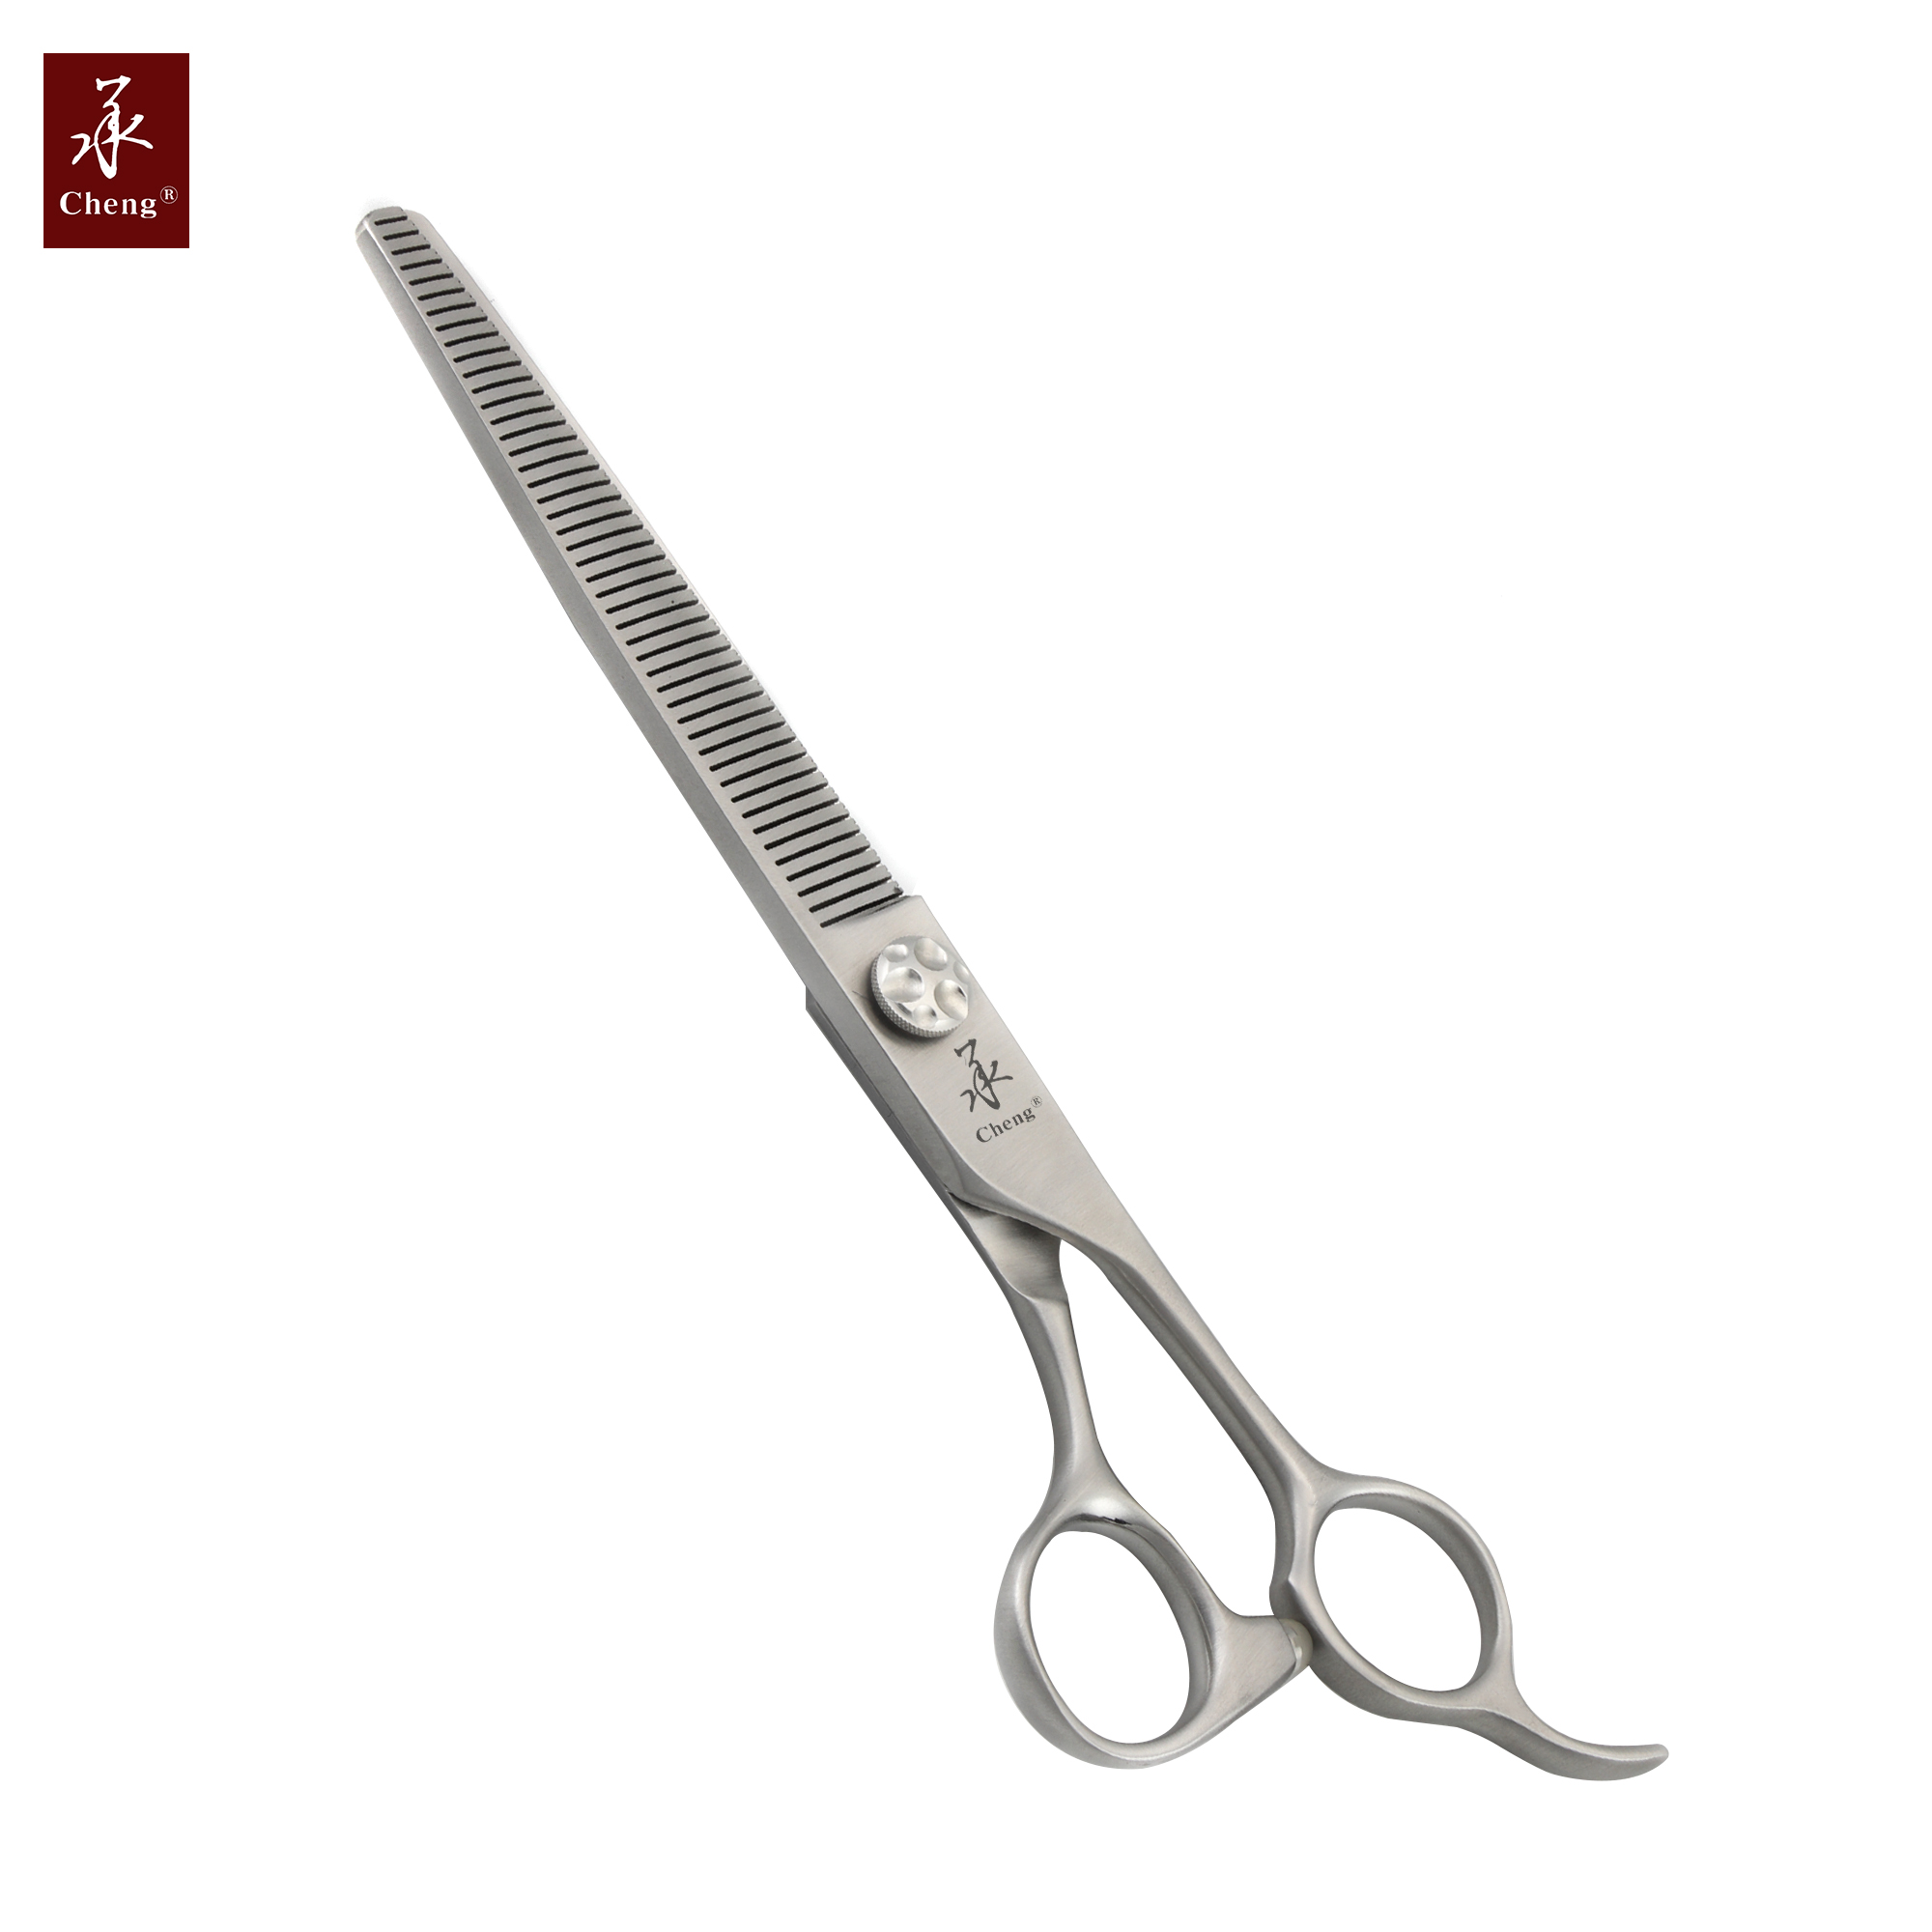 140-7050TQ Pet Dog Grooming Curved Thinning Scissors